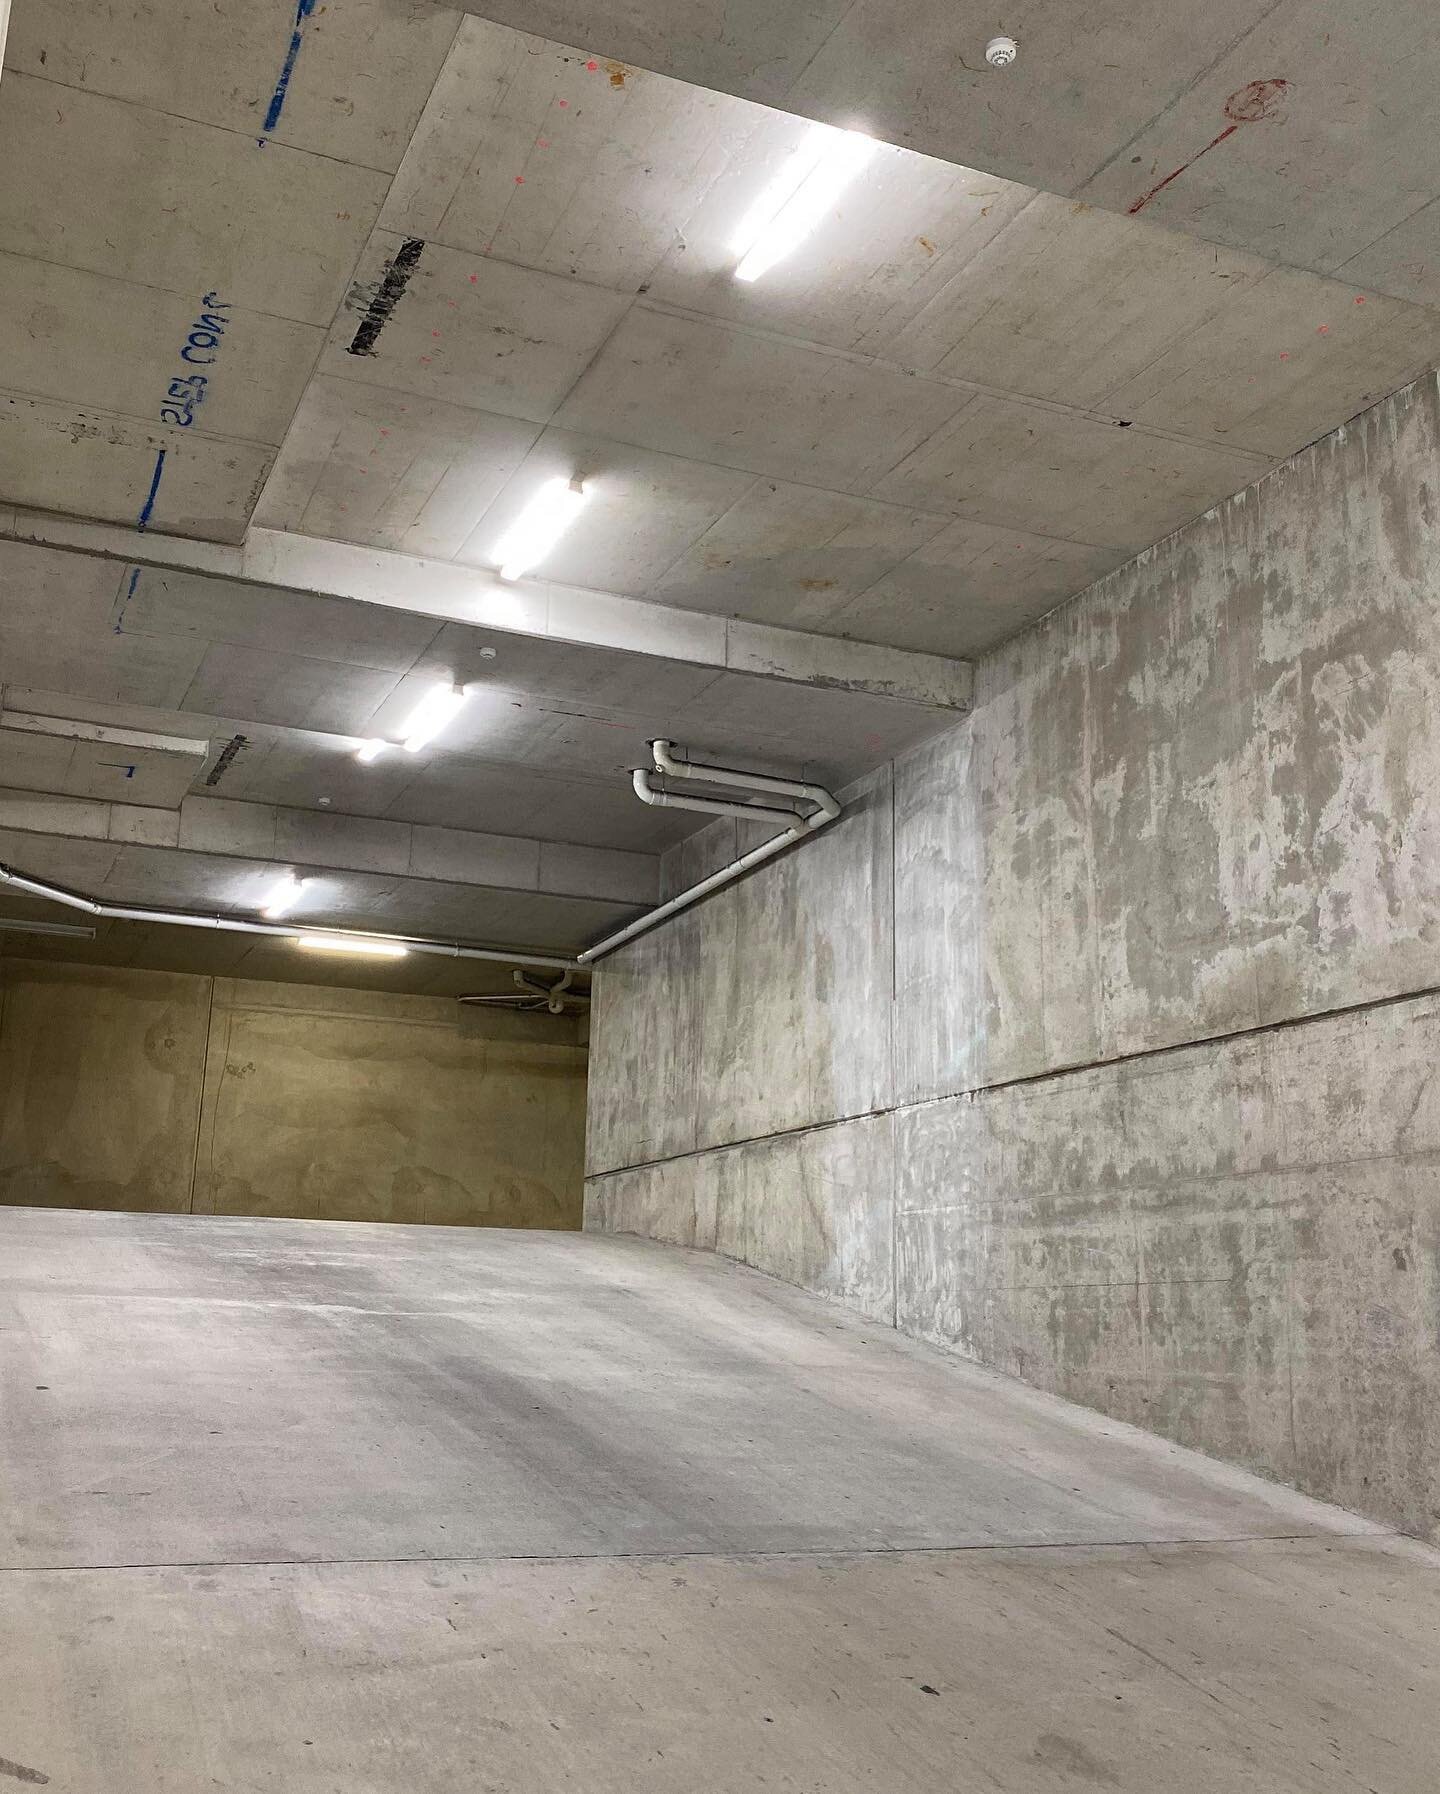 ☀️A quick little brighten up of a carpark ramp yesterday☀️ We&rsquo;re looking forward to getting the rest of the carpark up to scratch in the following stages! #ledlighting #carparklighting